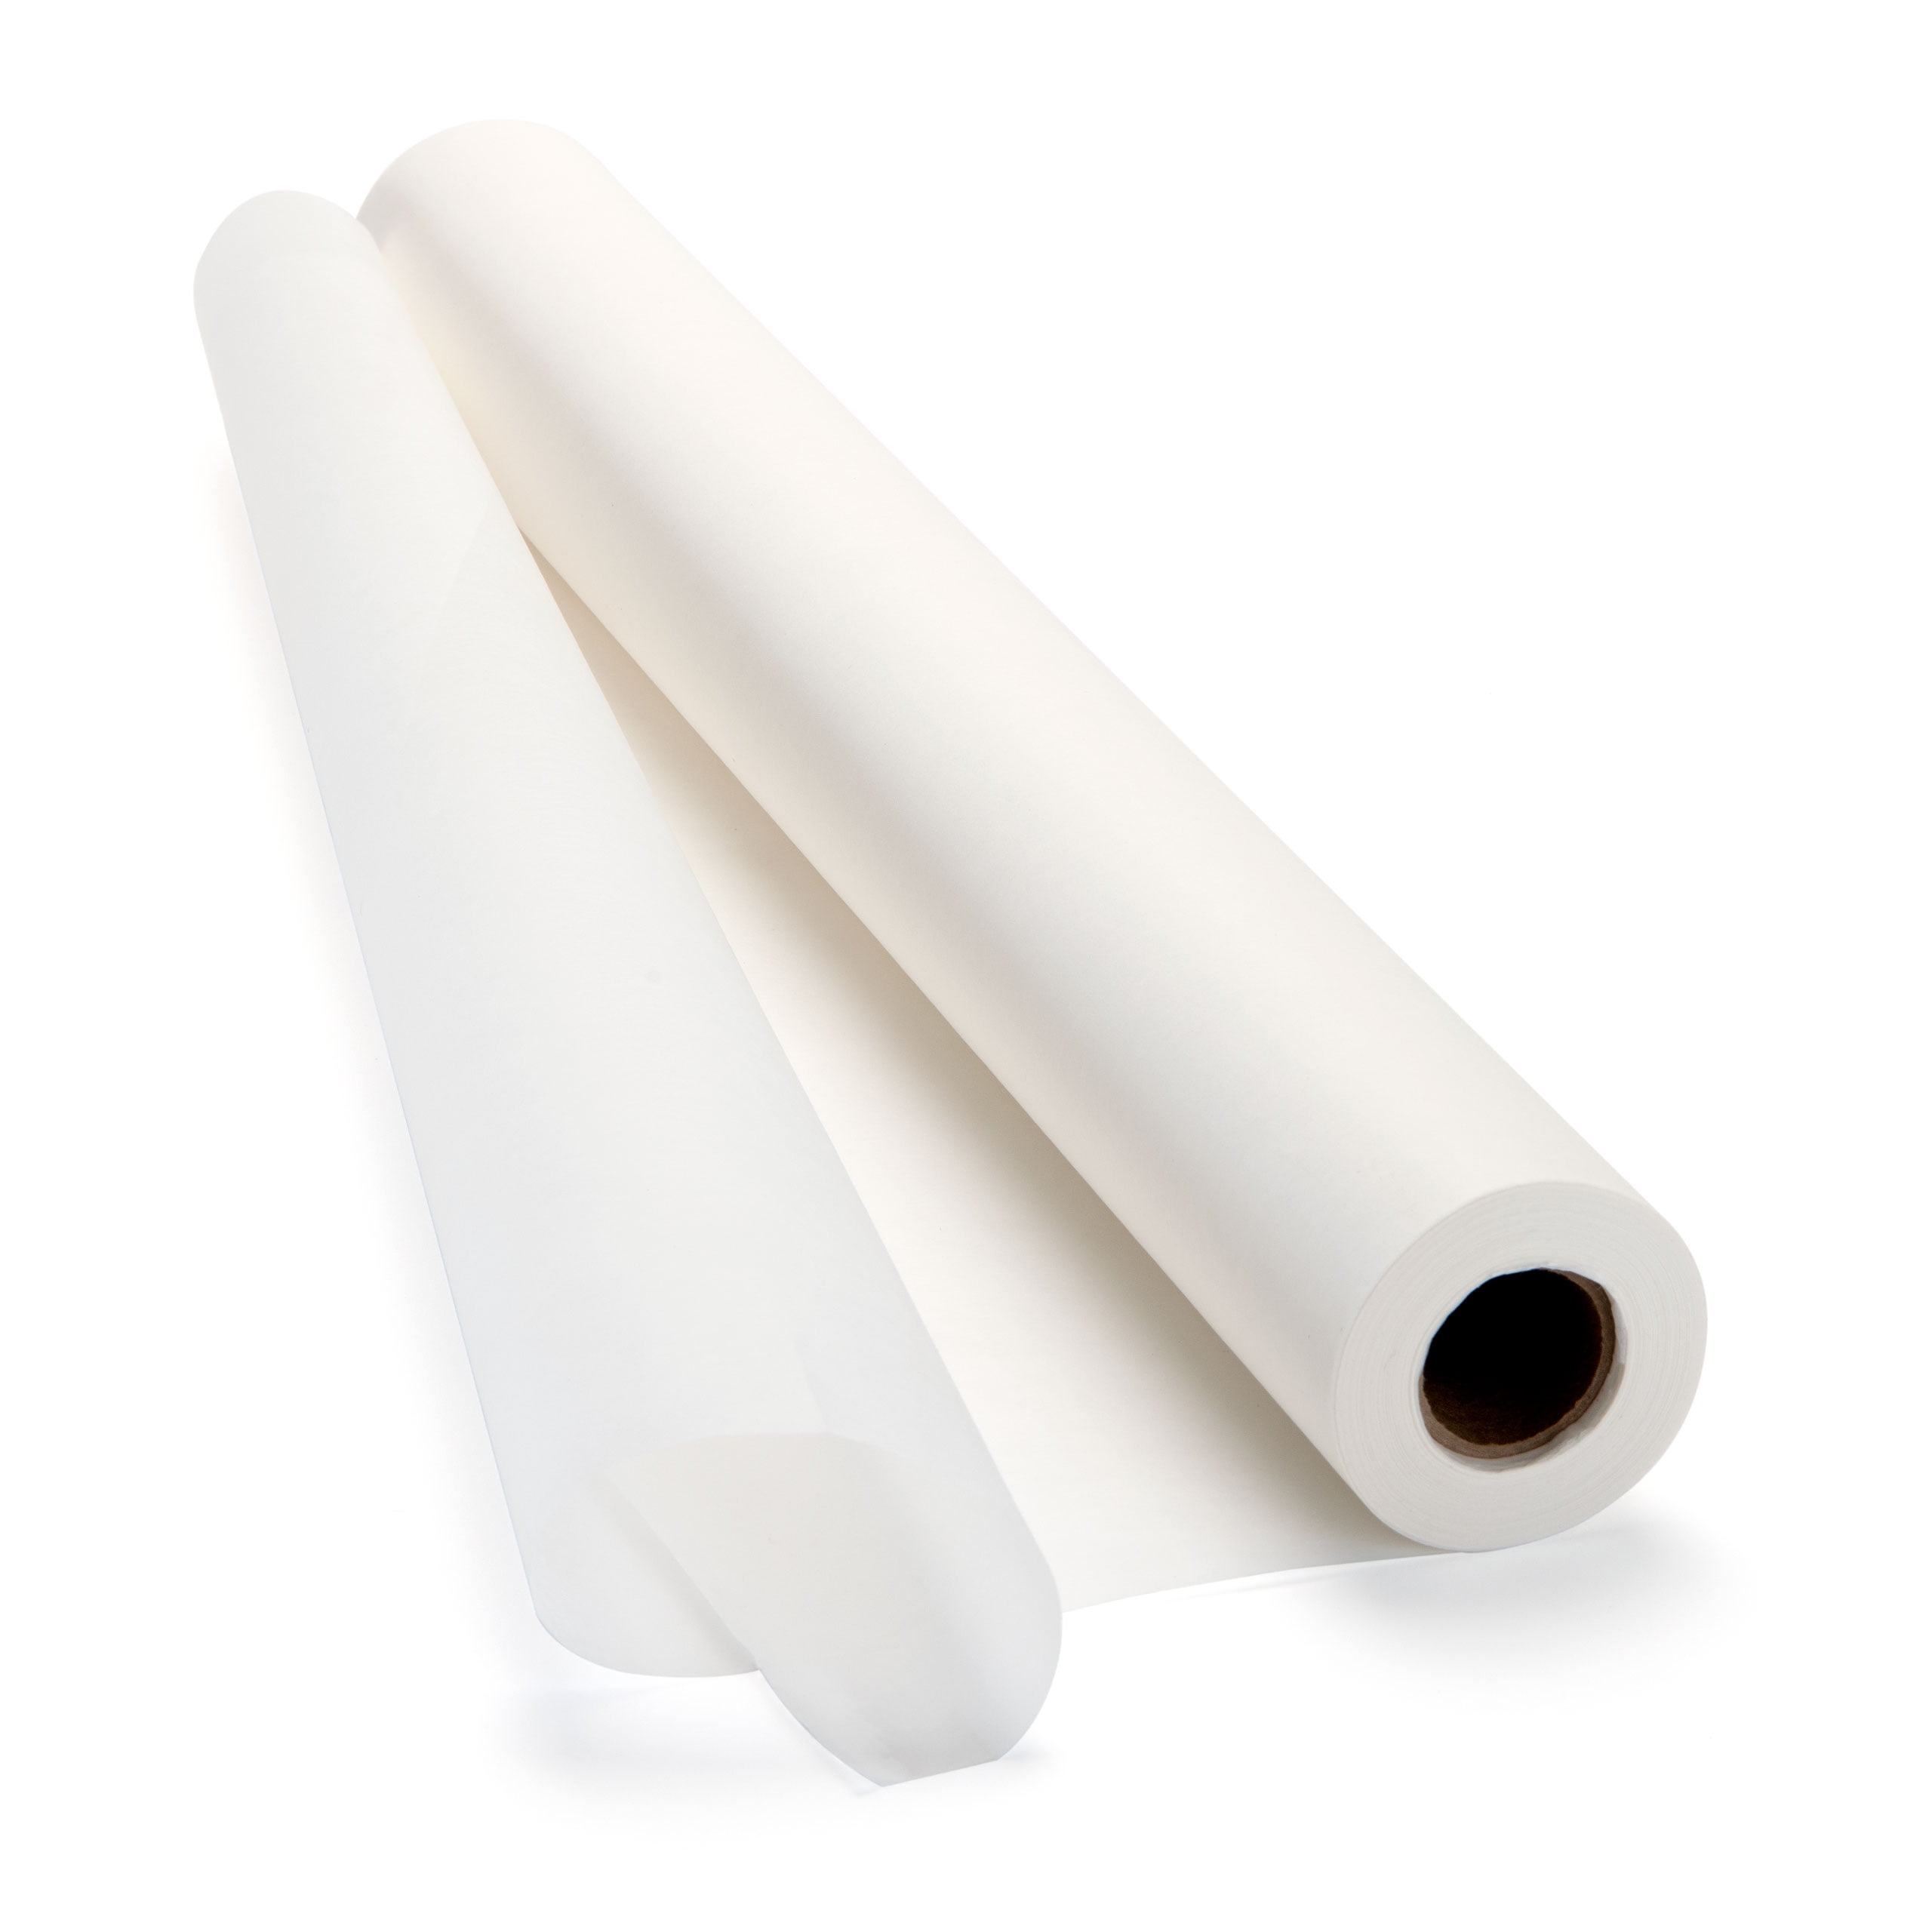 Bee Paper Extra 816R-0536 Heavyweight Rag Drawing Roll, 36-Inch by 5-Yards